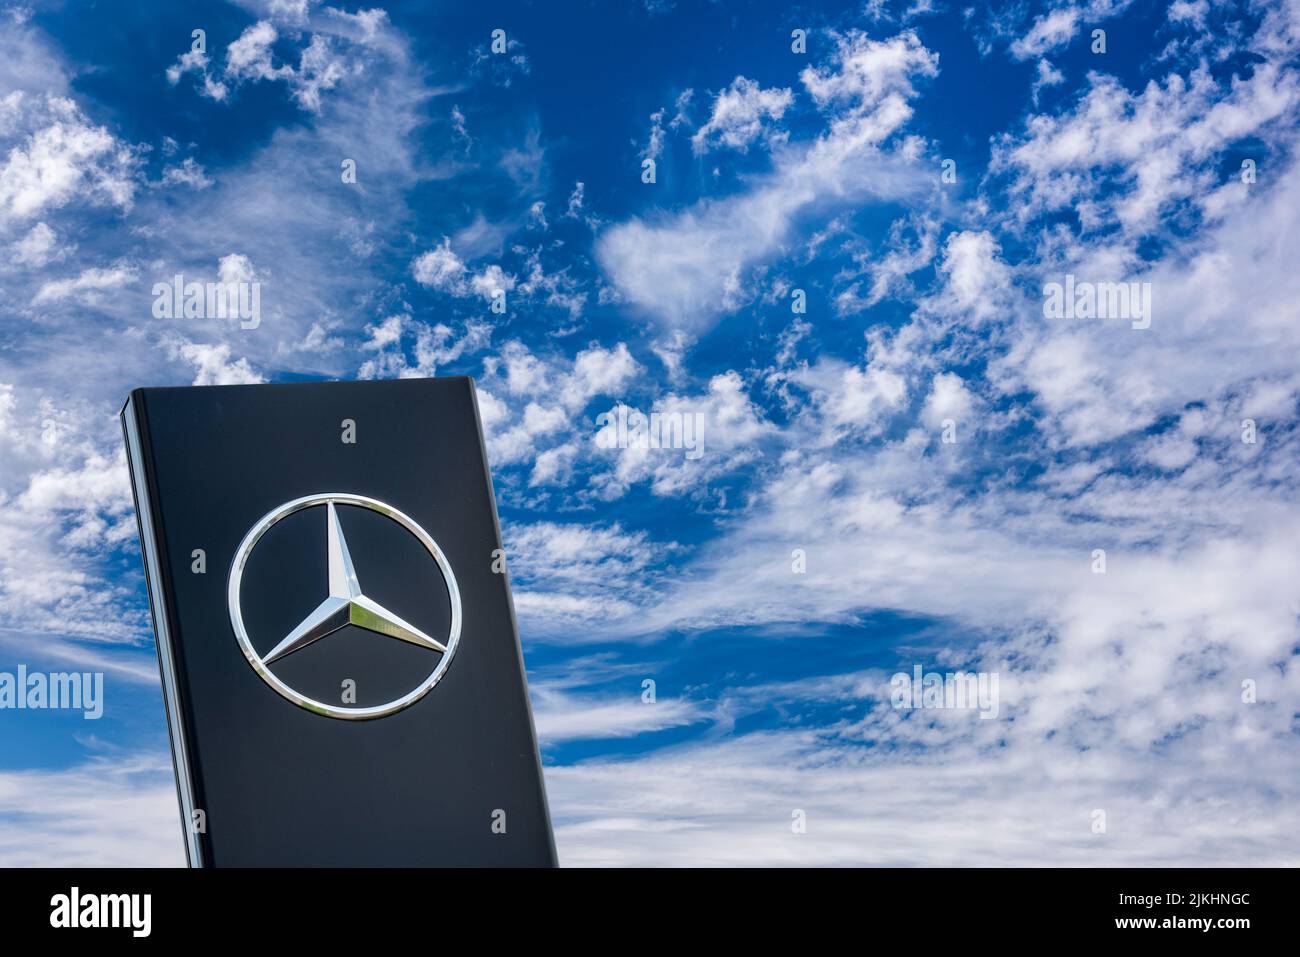 Company sign and logo of the car company Mercedes-Benz Stock Photo